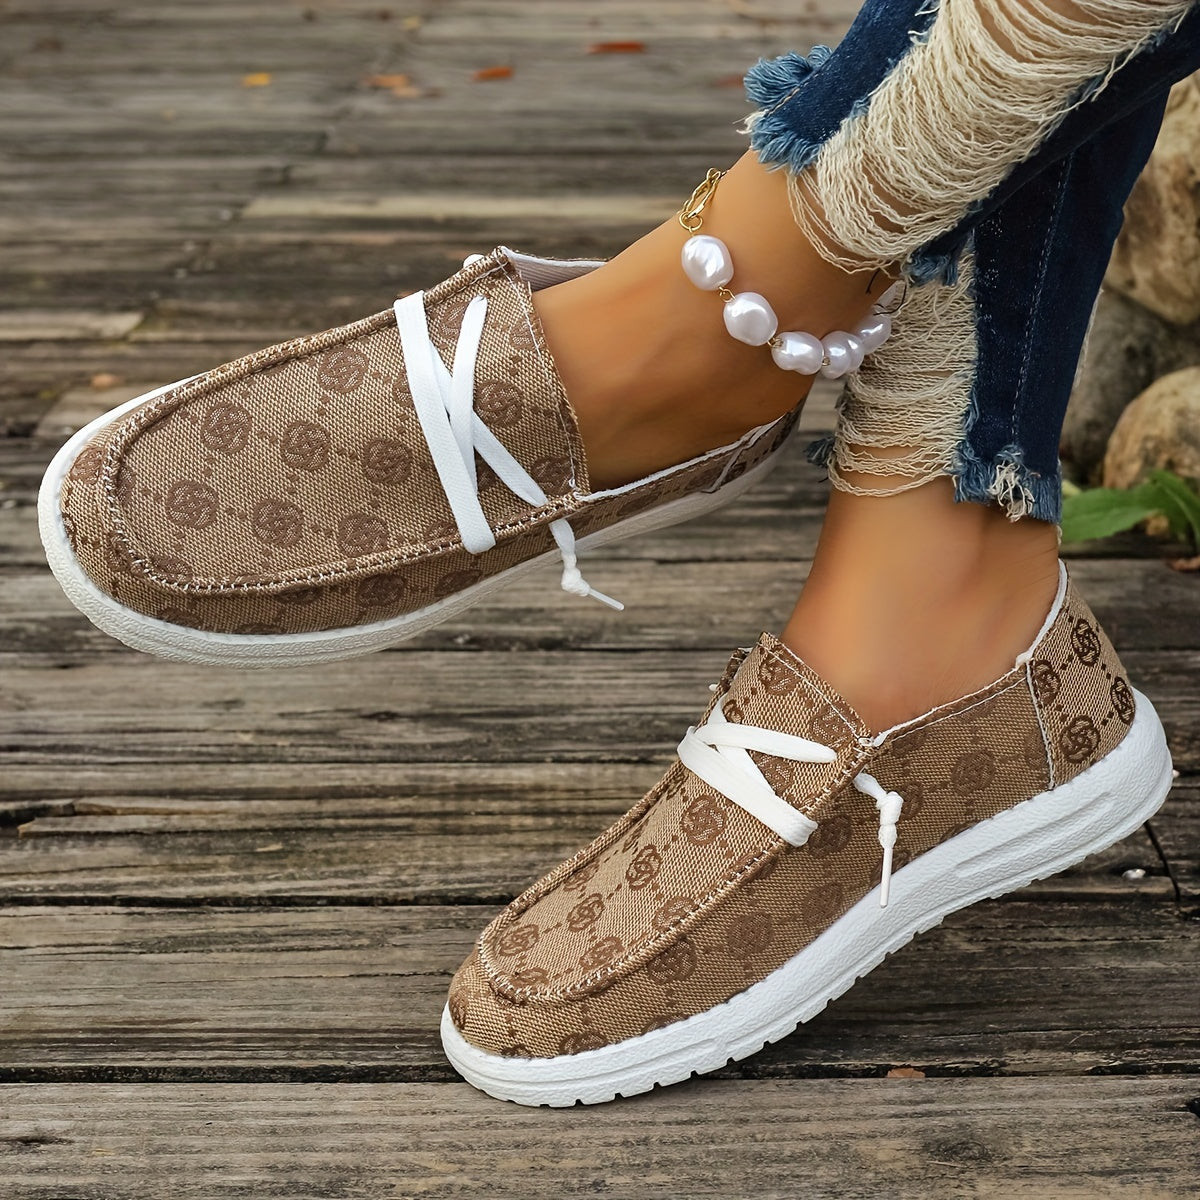 Women's Flower Pattern Canvas Shoes, Casual Lace Up Outdoor Shoes, Lightweight Low Top Sneakers